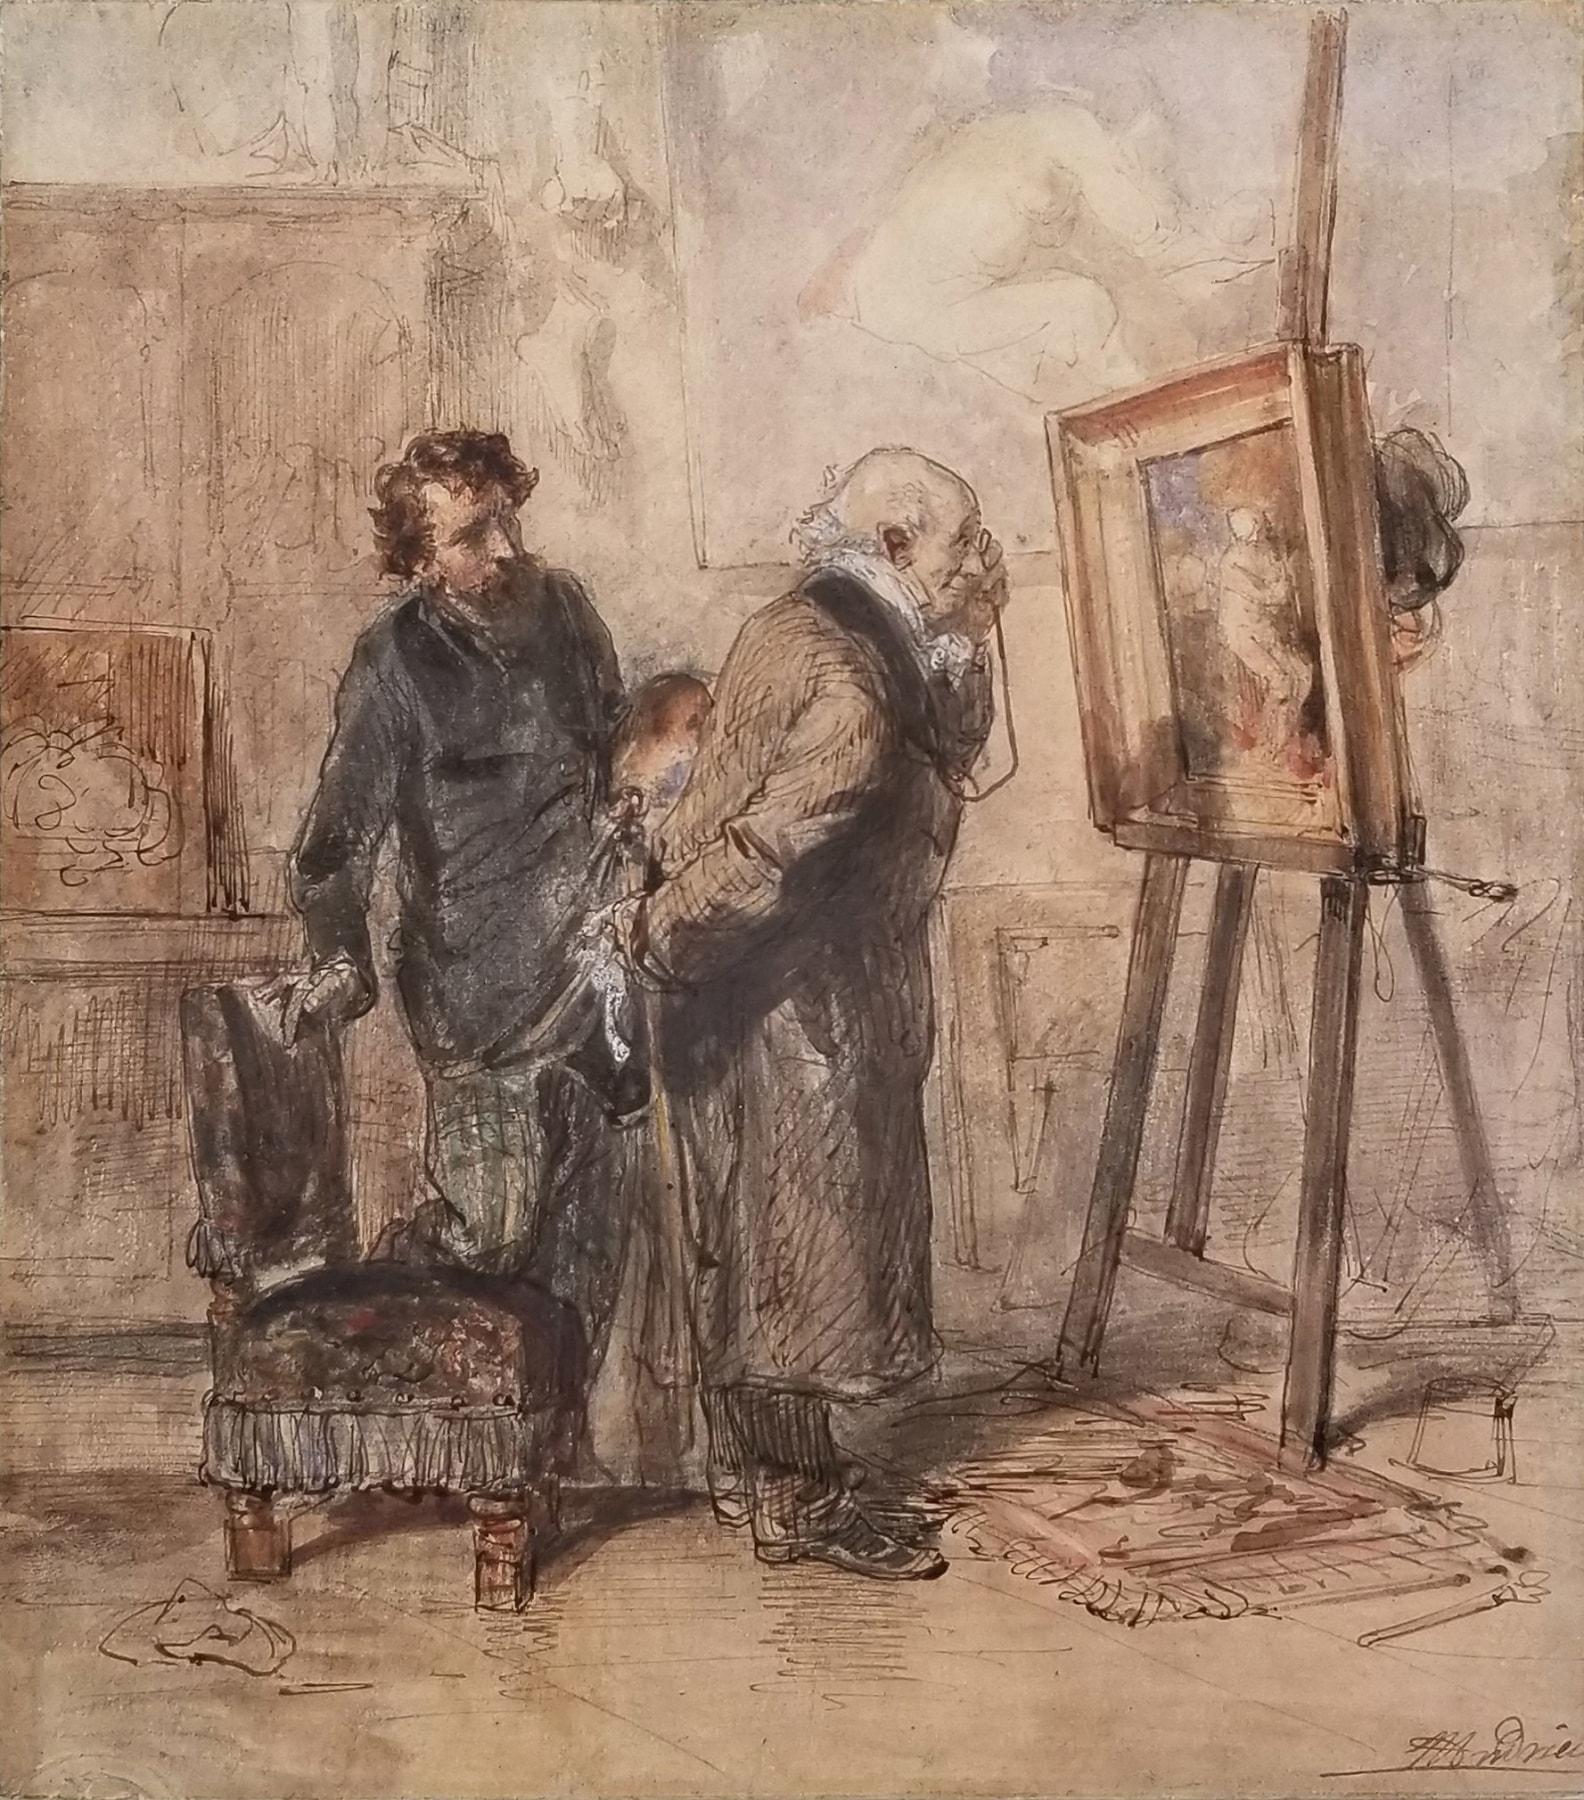 Clement-Auguste Andrieux, The Connoisseur, Watercolor heightened with white over pencil, 8 1/4 x 7 1/4 in. (21 x 18.7 cm), Signed lower right